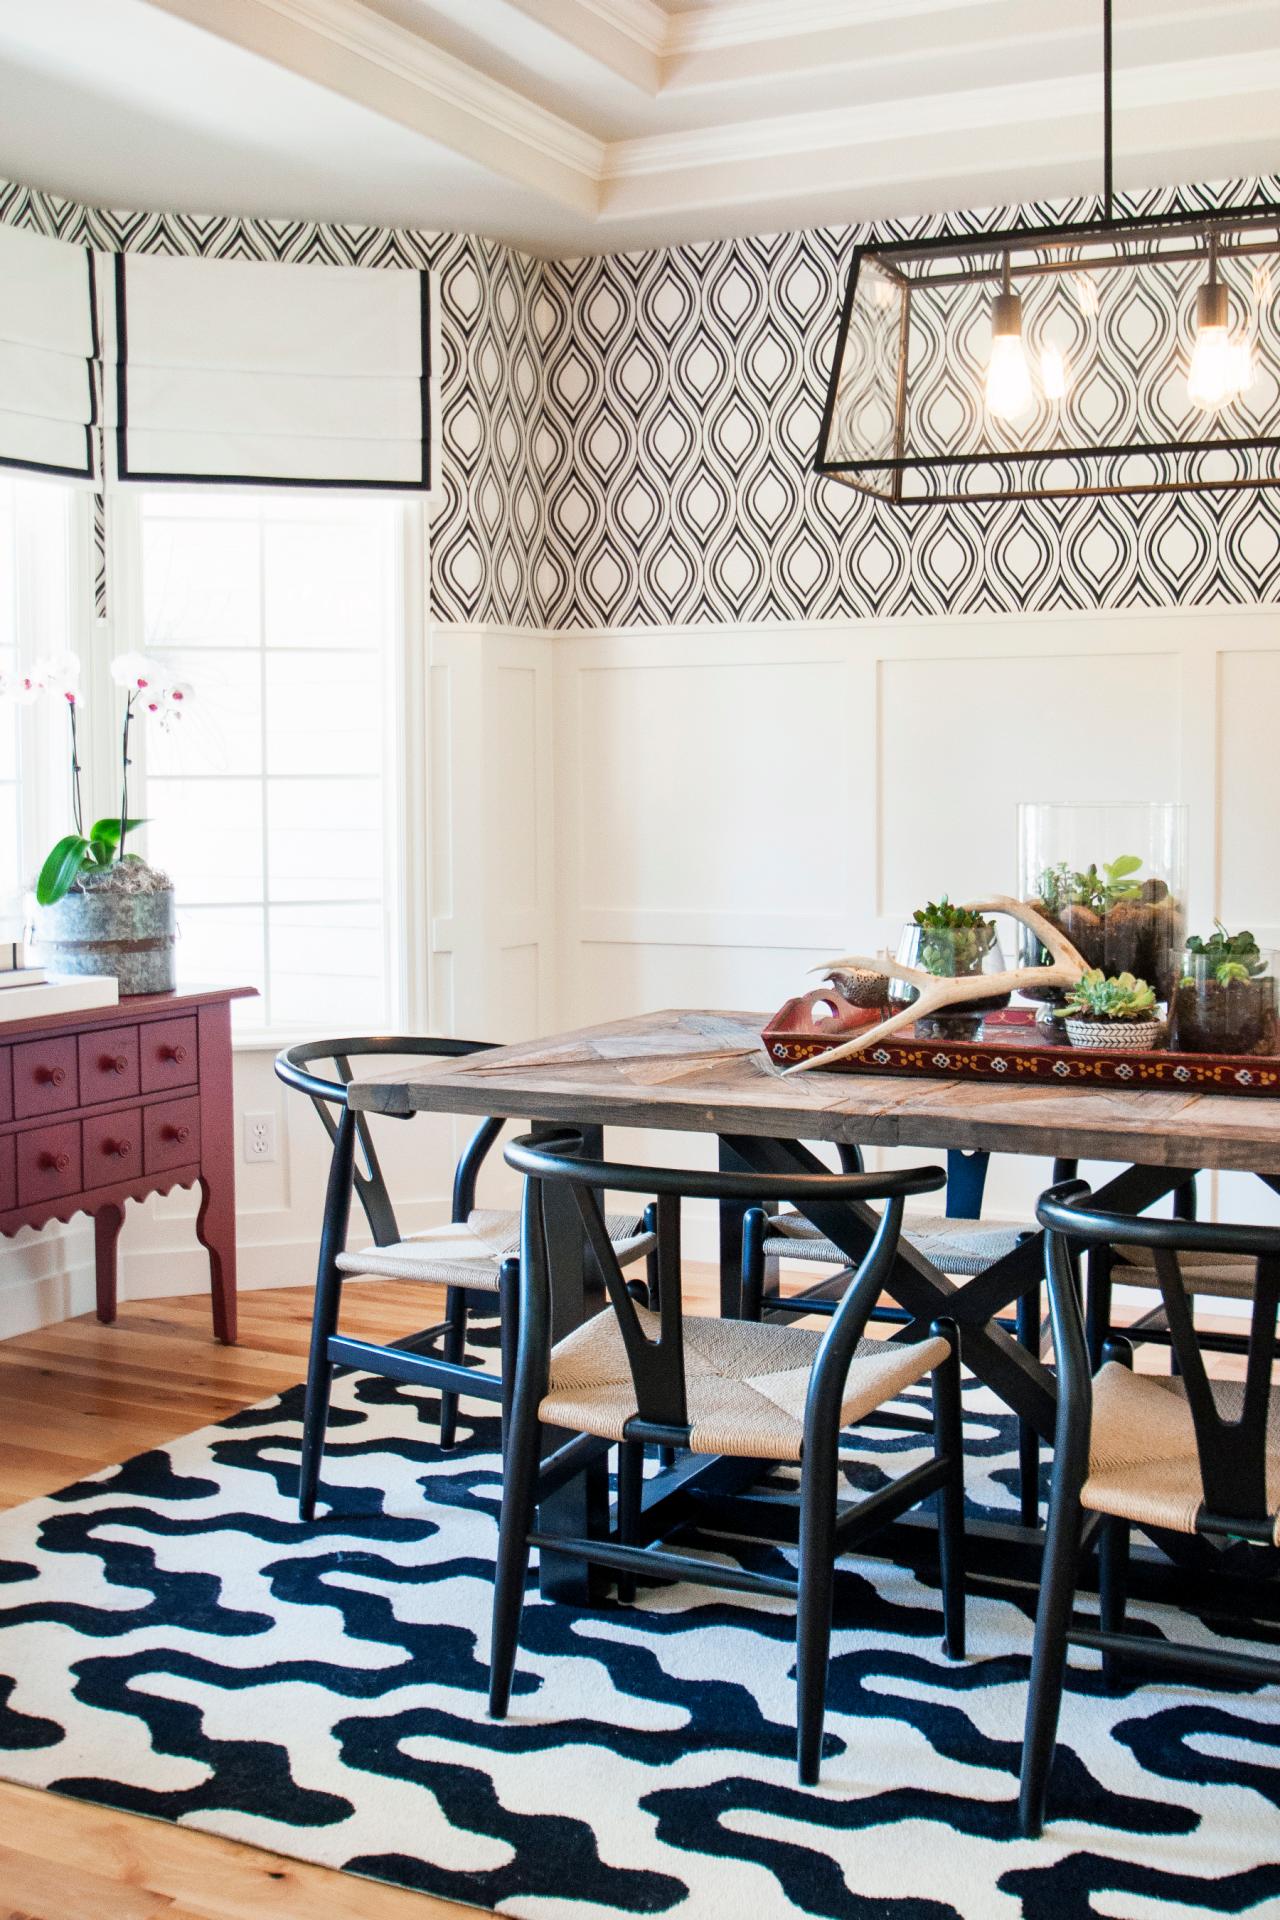 Black and White Dining Room Features Funky Patterns | HGTV